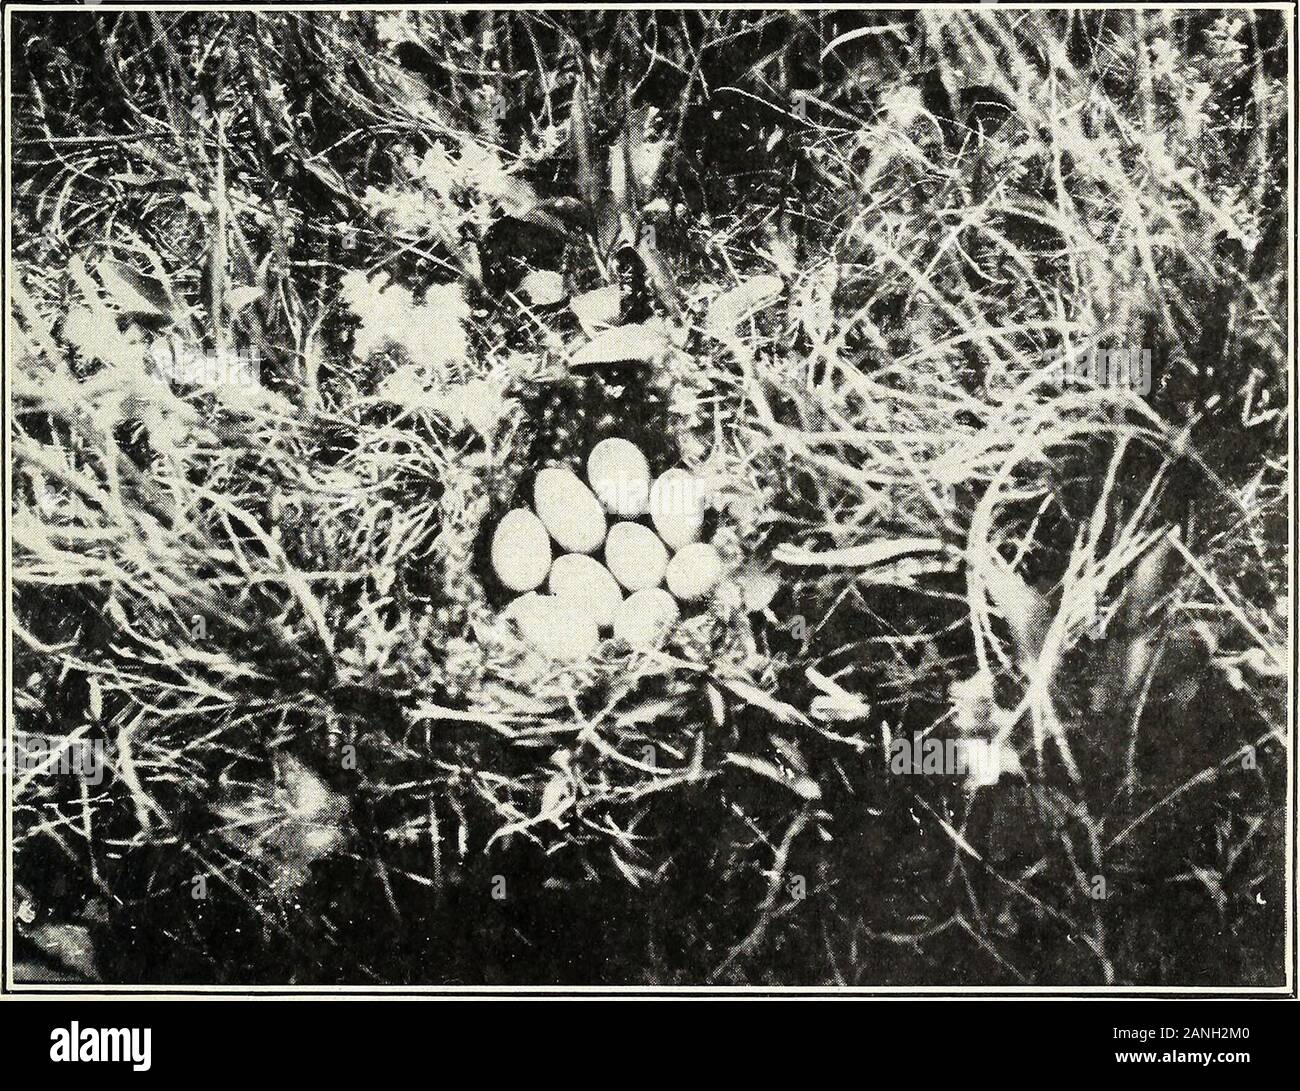 Waterfowl and their food plants in the Sandhill region of Nebraska . Fig. I.—Nest of Coot (Fulica Americana Americana). Photograph taken at Pelican Lake, eastern Cherry County, Nebr., on June 10, 1915.. Fig. 2.—Nest of Pintail (Dafila acuta tzitzihoa). Photograph taken at Dewey Lake, eastern Cherry County, Nebr., on June 5, 1915. WATERFOWL IN NEBRASKA. 29 t KING RAIL. Rallus elegans. This species has bred at Trout Lake and at some of the other bodies of waterin this region, but is apparently rare. VIRGINIA RAIL. Rallus virgimanus. This rail seems to be rare, though known to many inhabitants of Stock Photo